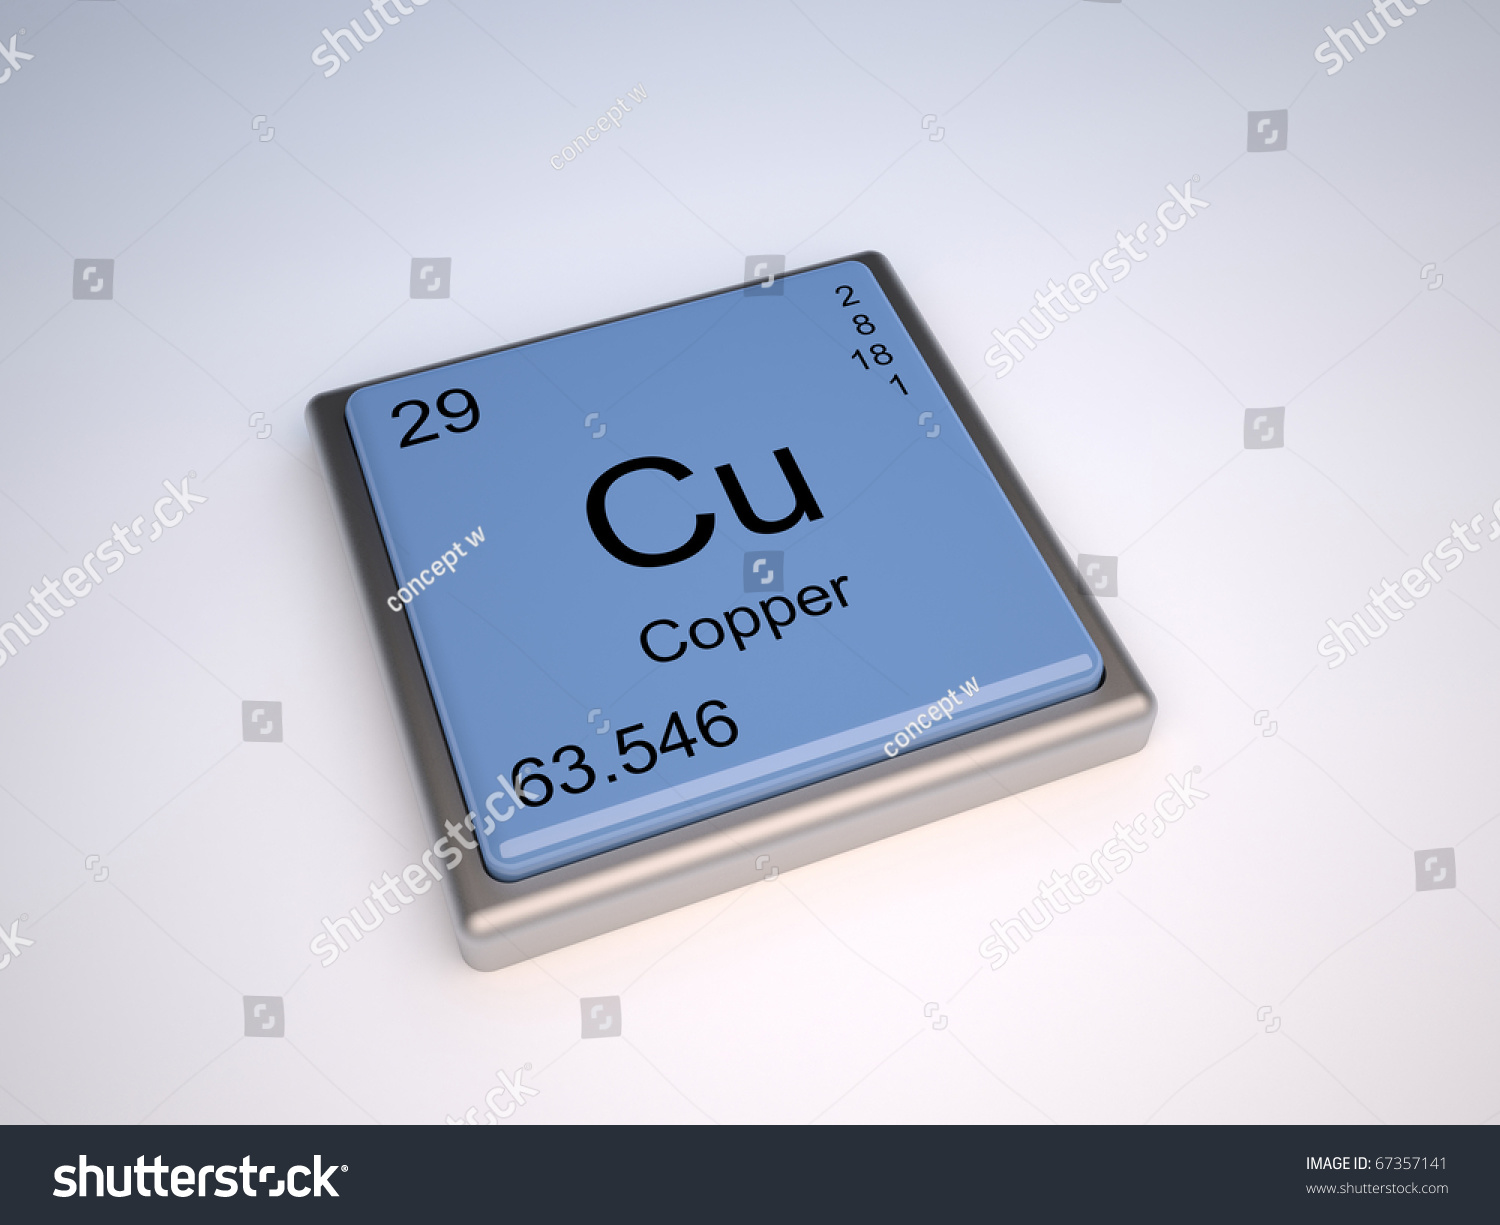 Copper Chemical Element Periodic Table Symbol Stock Illustration 67357141 Shutterstock 4074